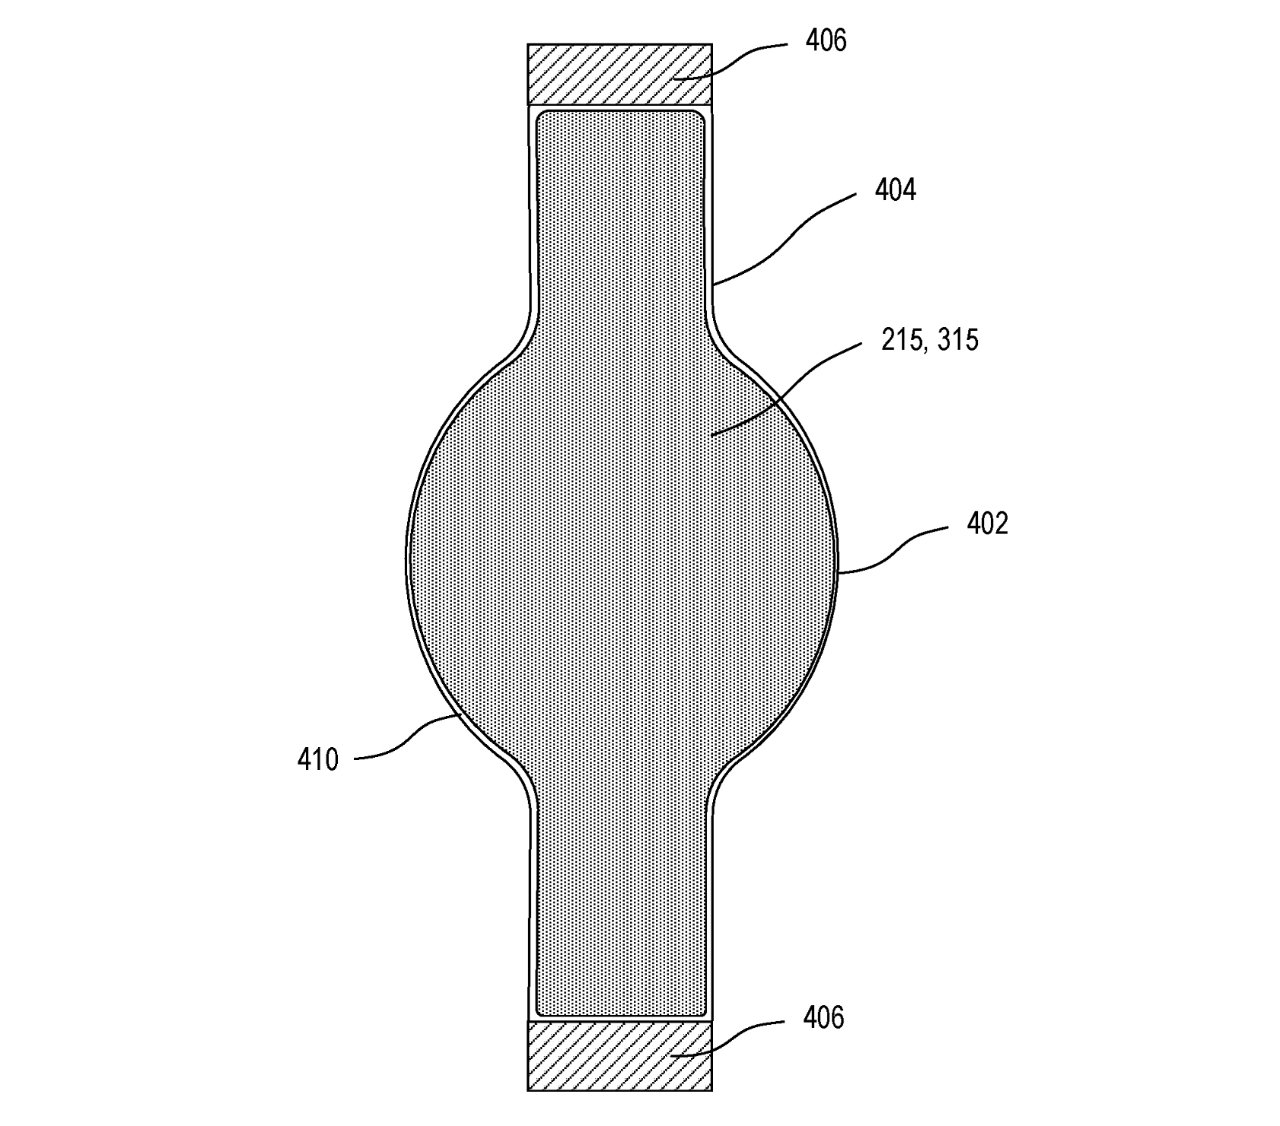 Detail from the patent showing one continuous screen across the band and the regular Apple Watch display area